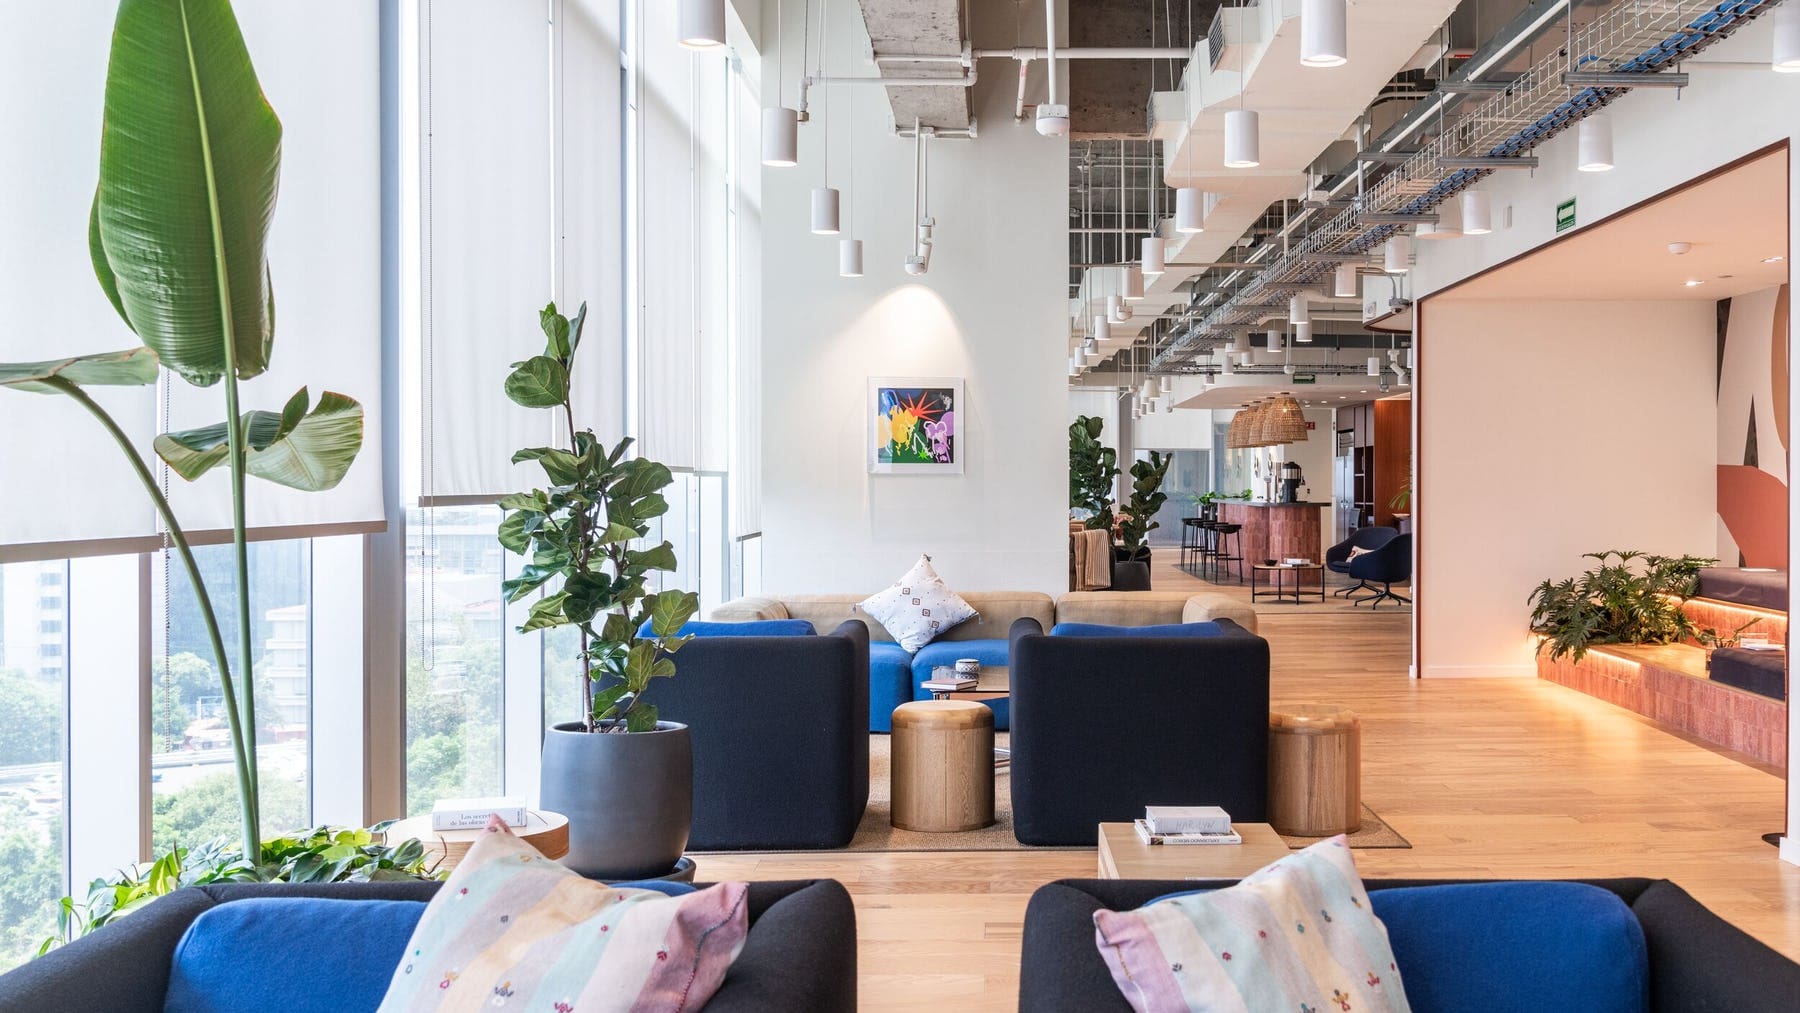 The best places to co-working in Mexico City | A large bright room with wooden floors, white walls and floor to ceiling windows, with blue sofas and plenty of greenery